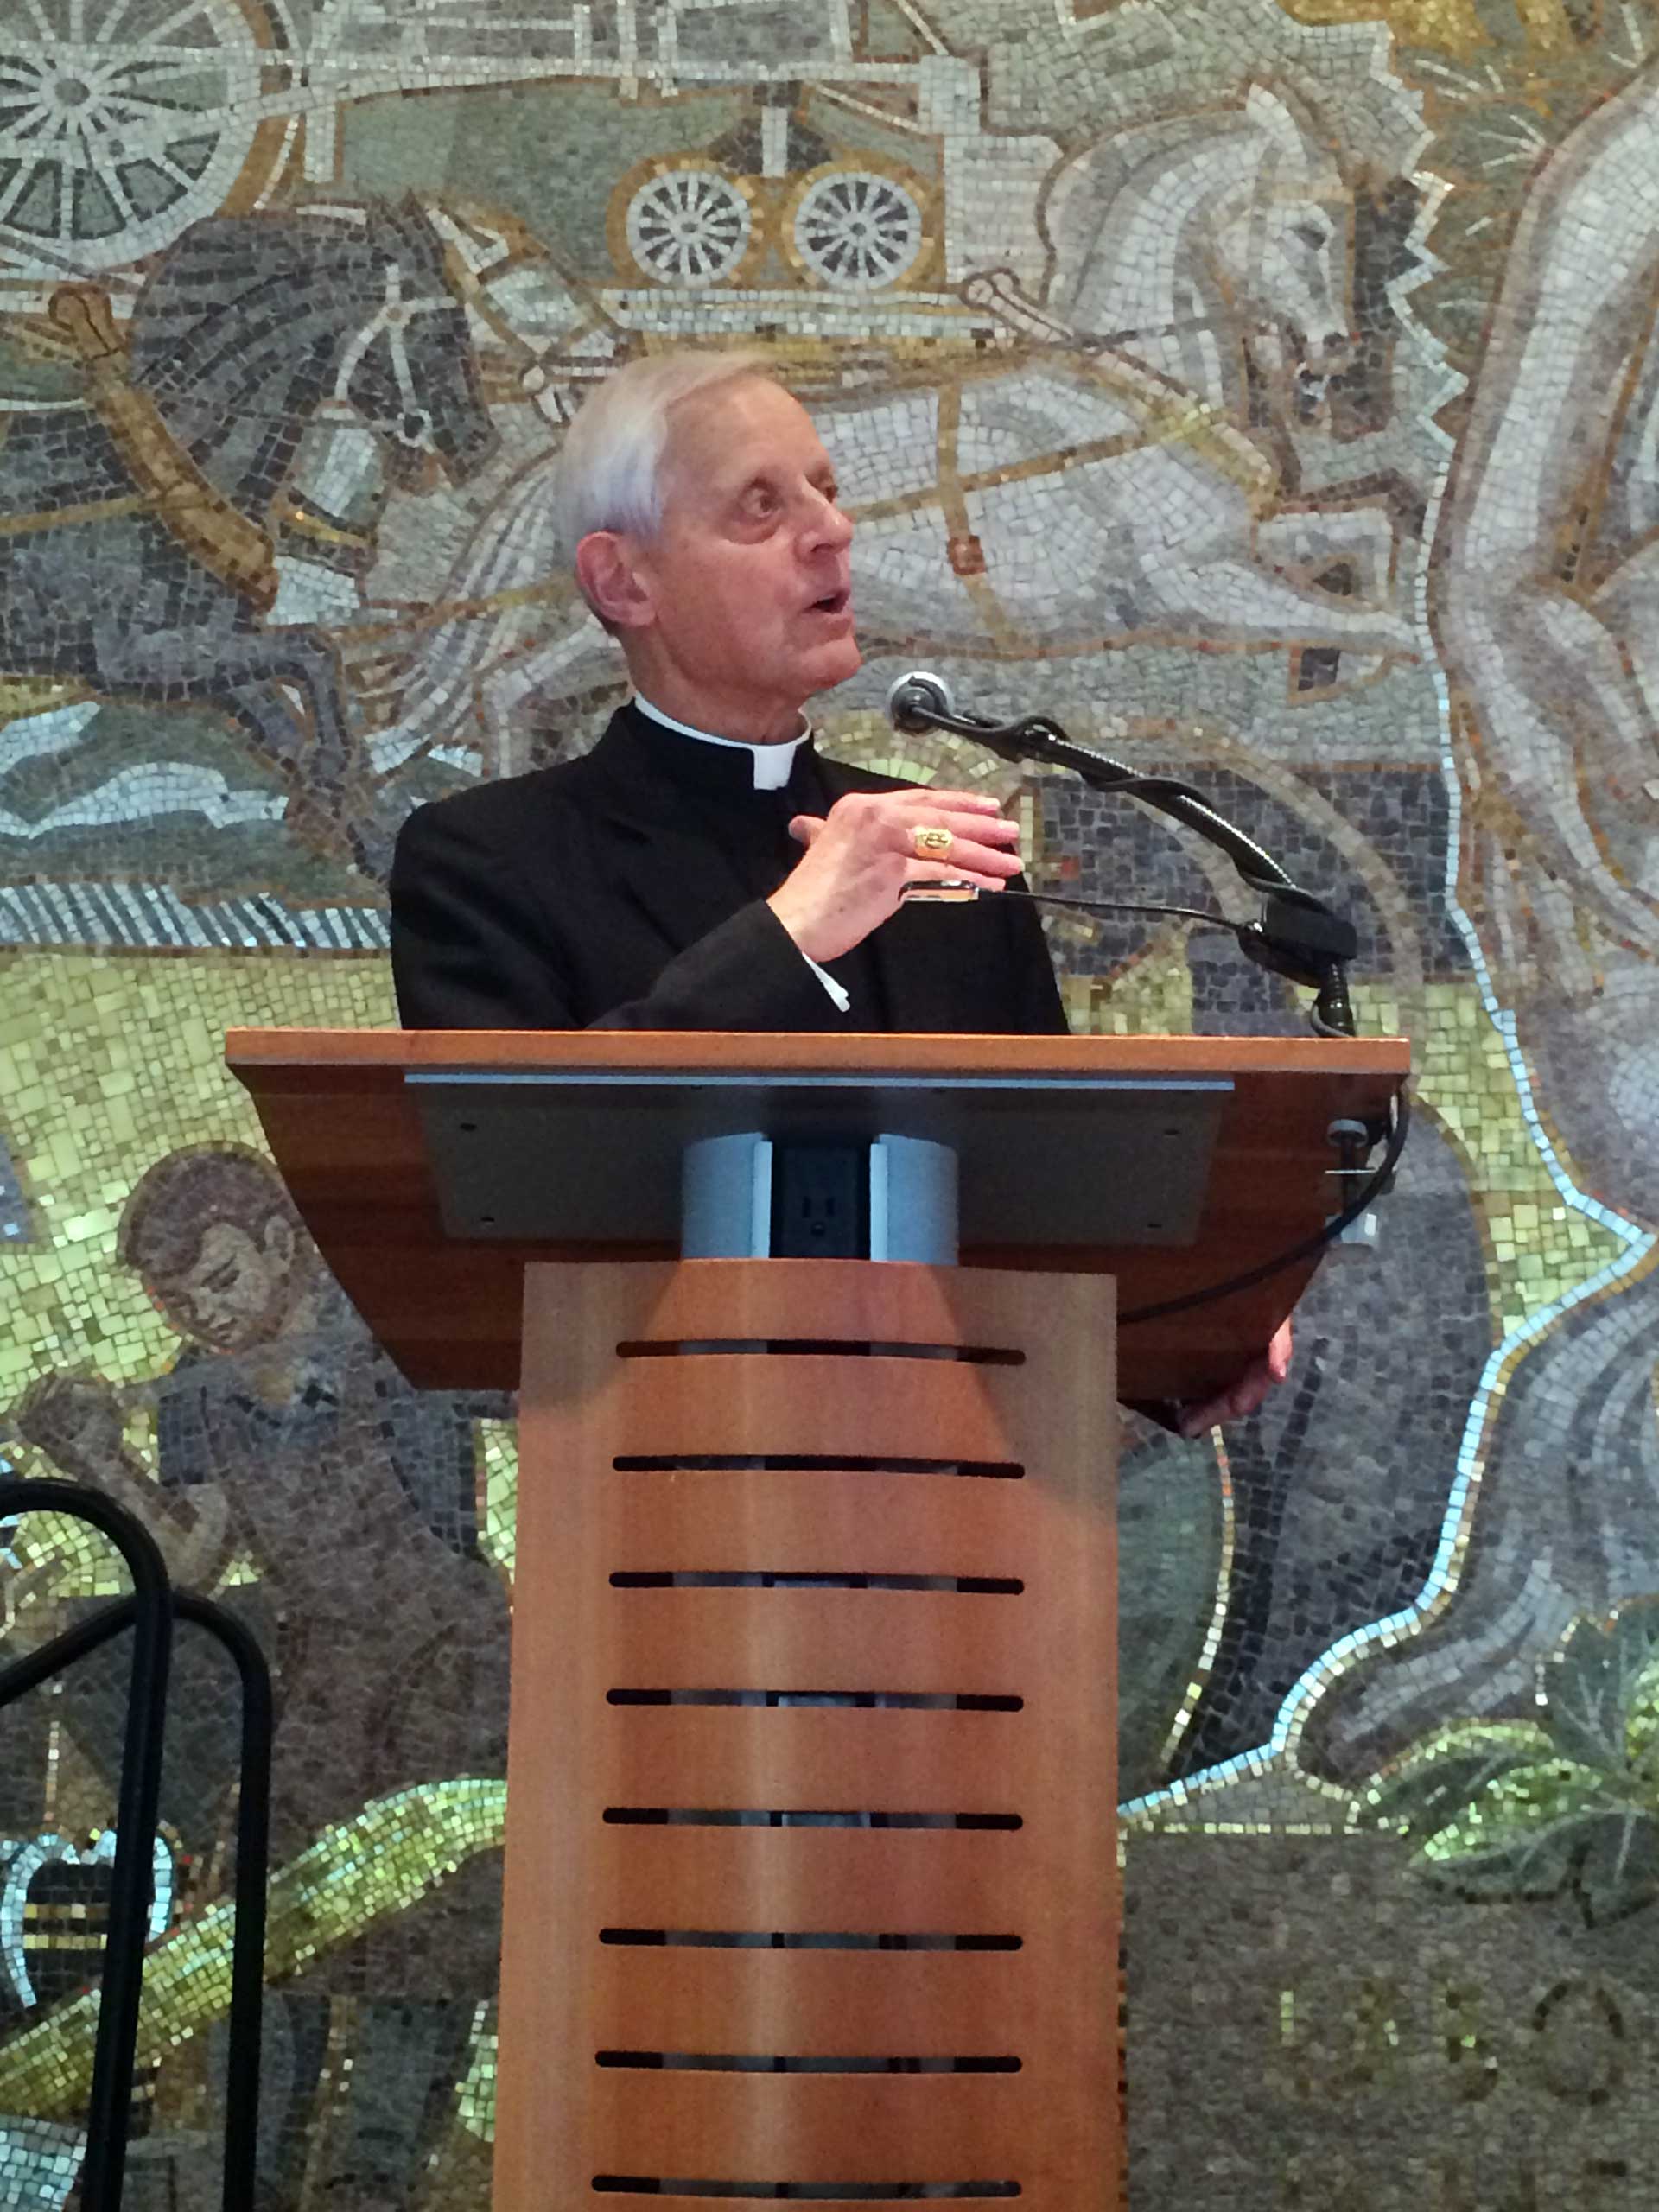 Cardinal Donald Wuerl speaks at an AFL-CIO event in Washington on June 15, 2015.